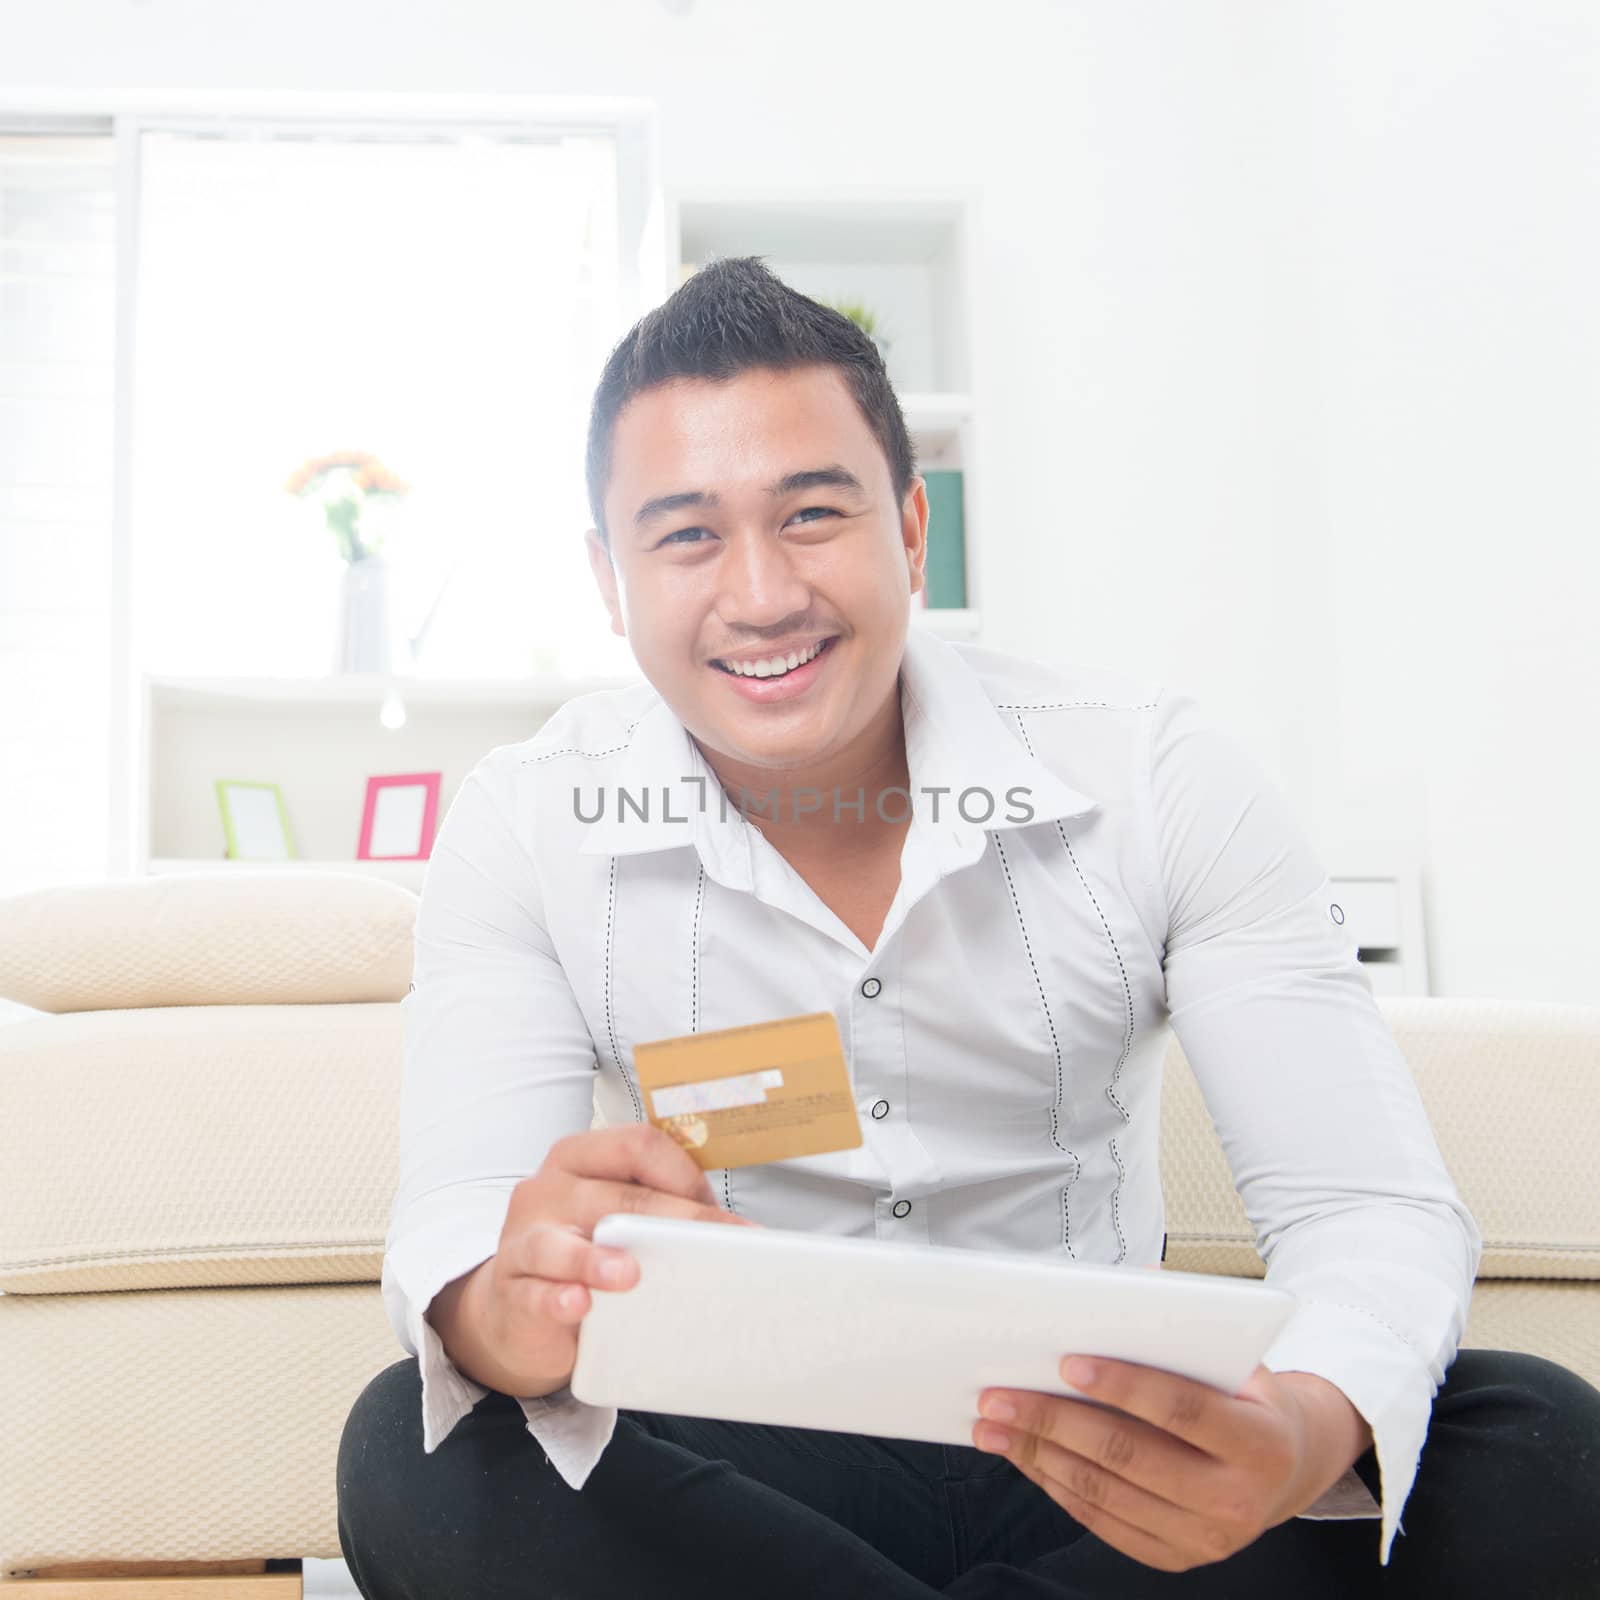 Attractive Southeast Asian man using a credit card to shop on the internet with a tablet computer. Asian male model at home.